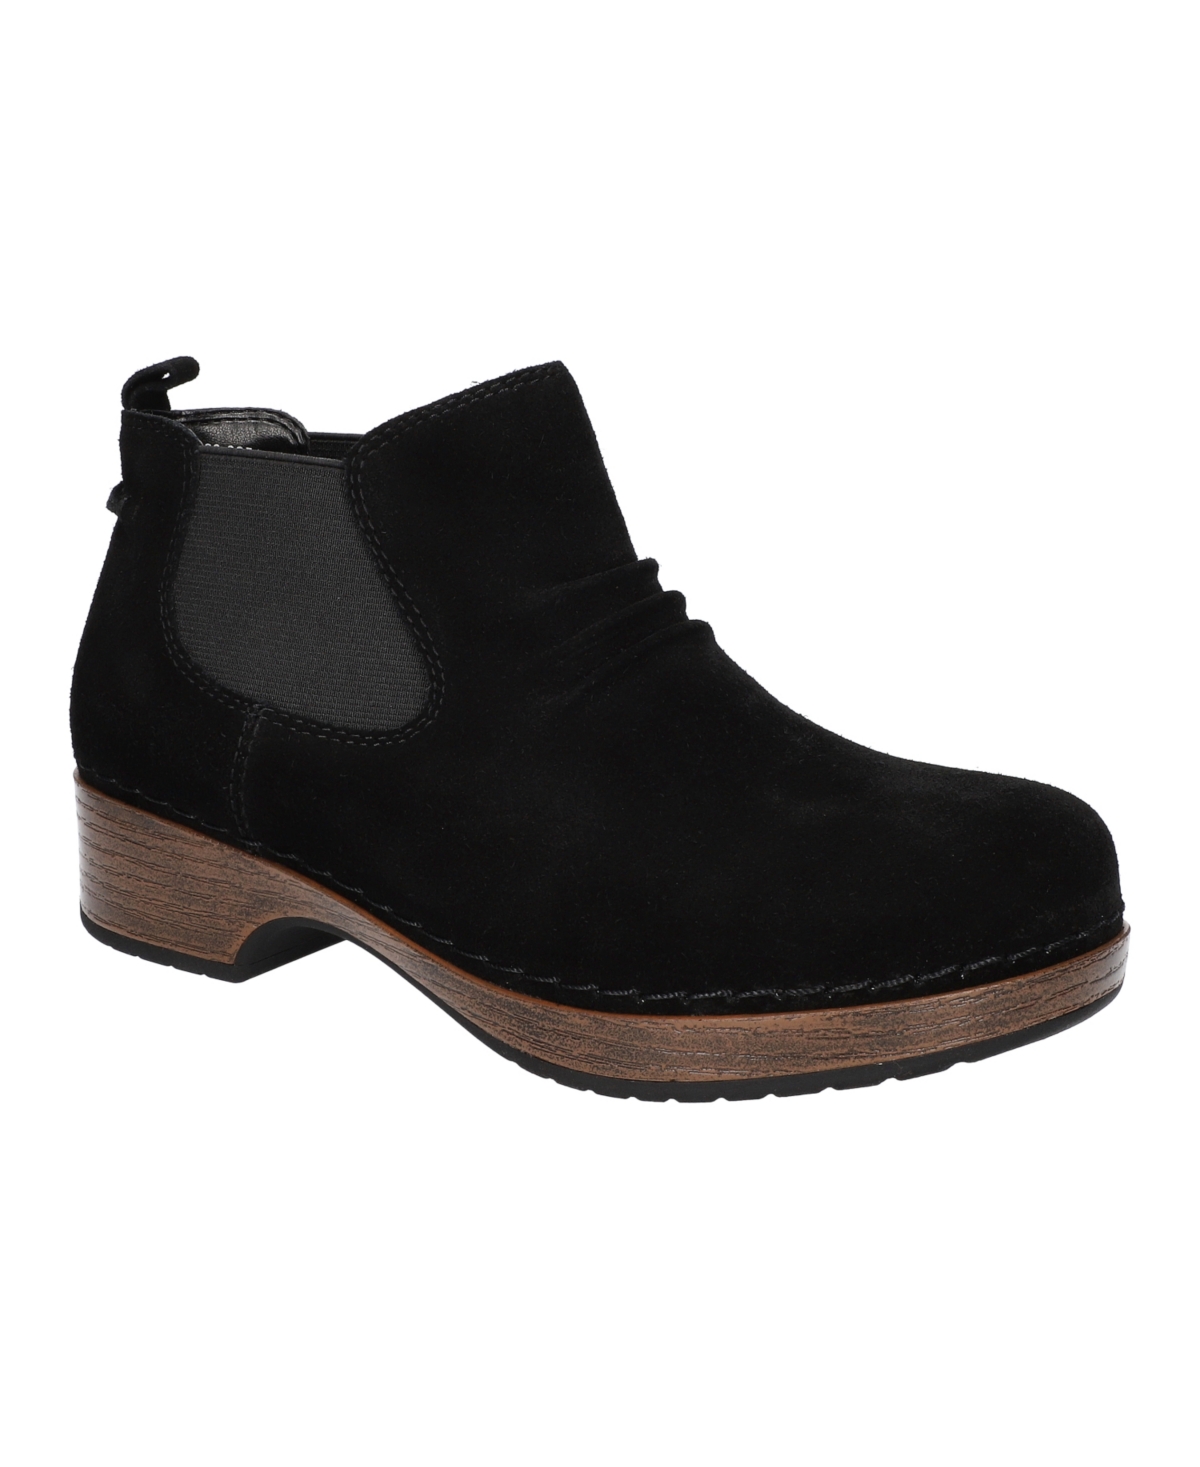 Women's Sure thing Slip Resistant Chelsea Boots - Black Suede Leather